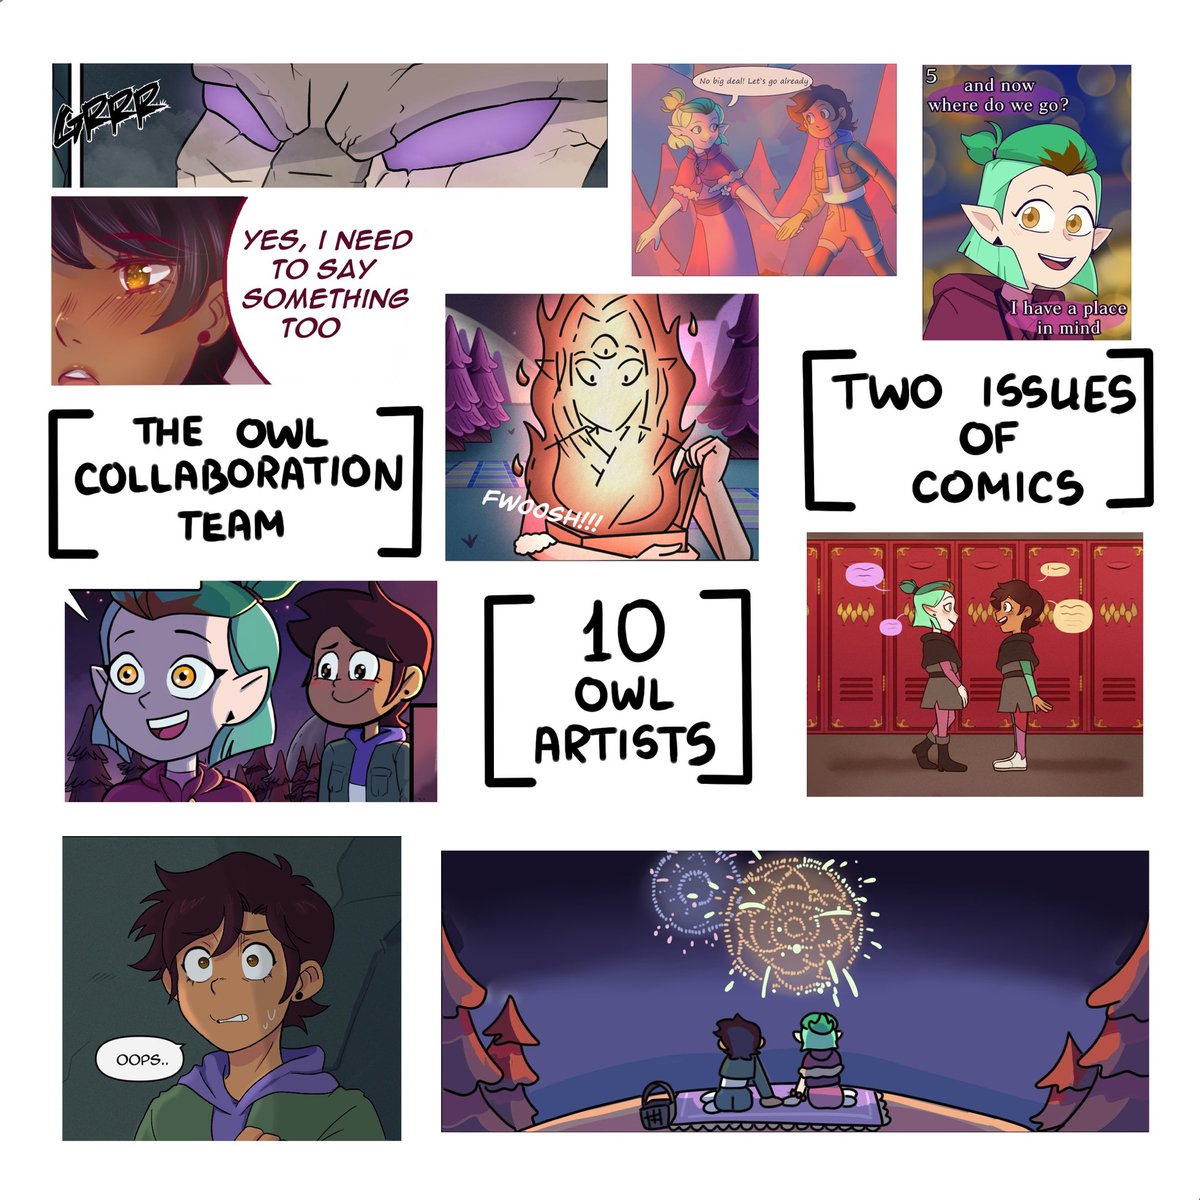 RT @ScatterAdam: New comics collaboration! 

Two weeks left! 

[The Owl Collaboration Team] 

#TheOwlHouse https://t.co/OFemaWJpQn